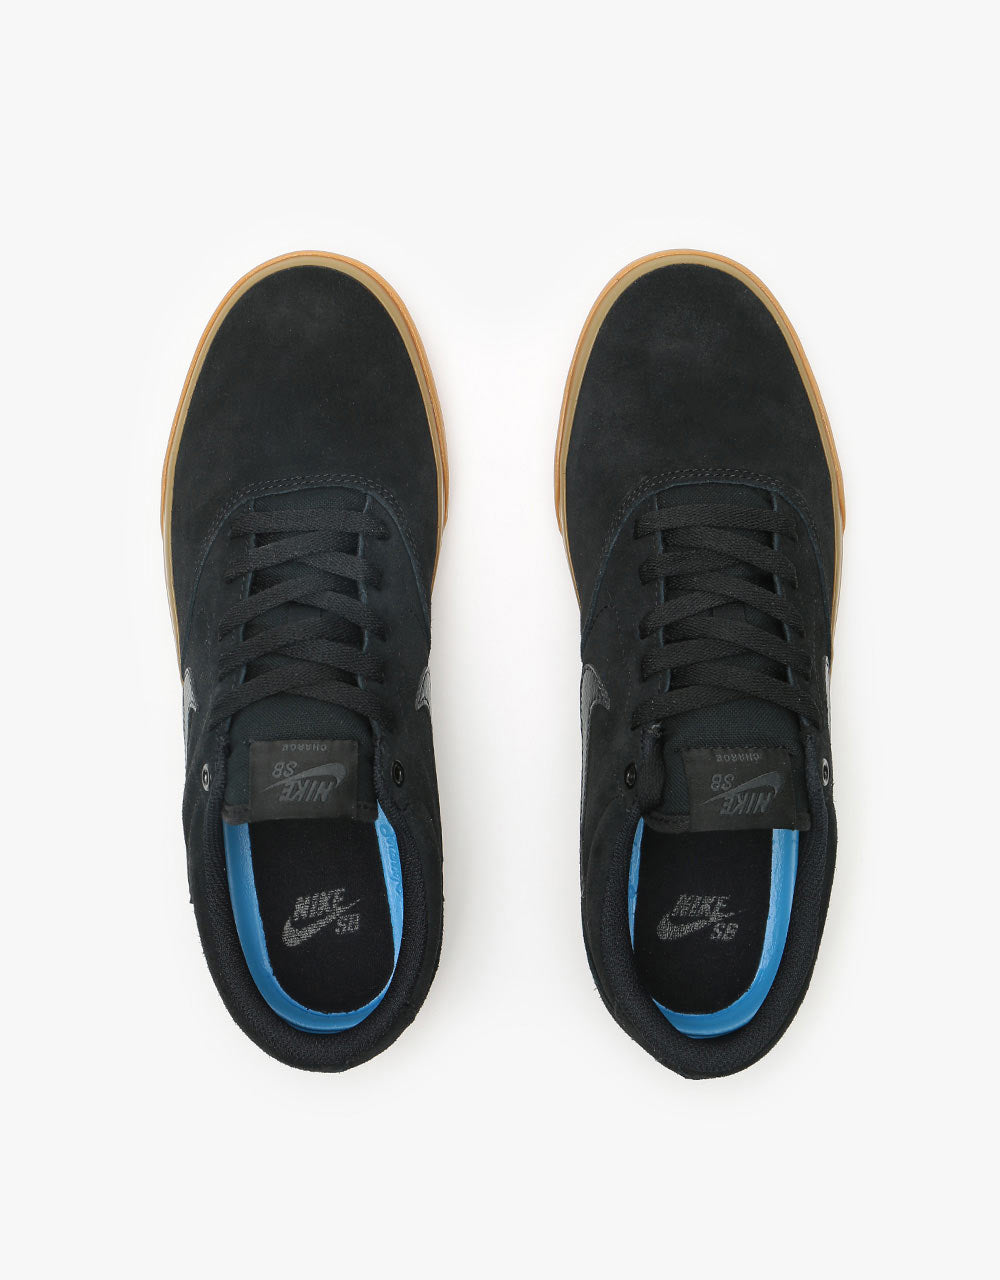 Nike SB Charge Suede Skate Shoes - Black/Anthracite-Black-Gum Light Br –  Route One